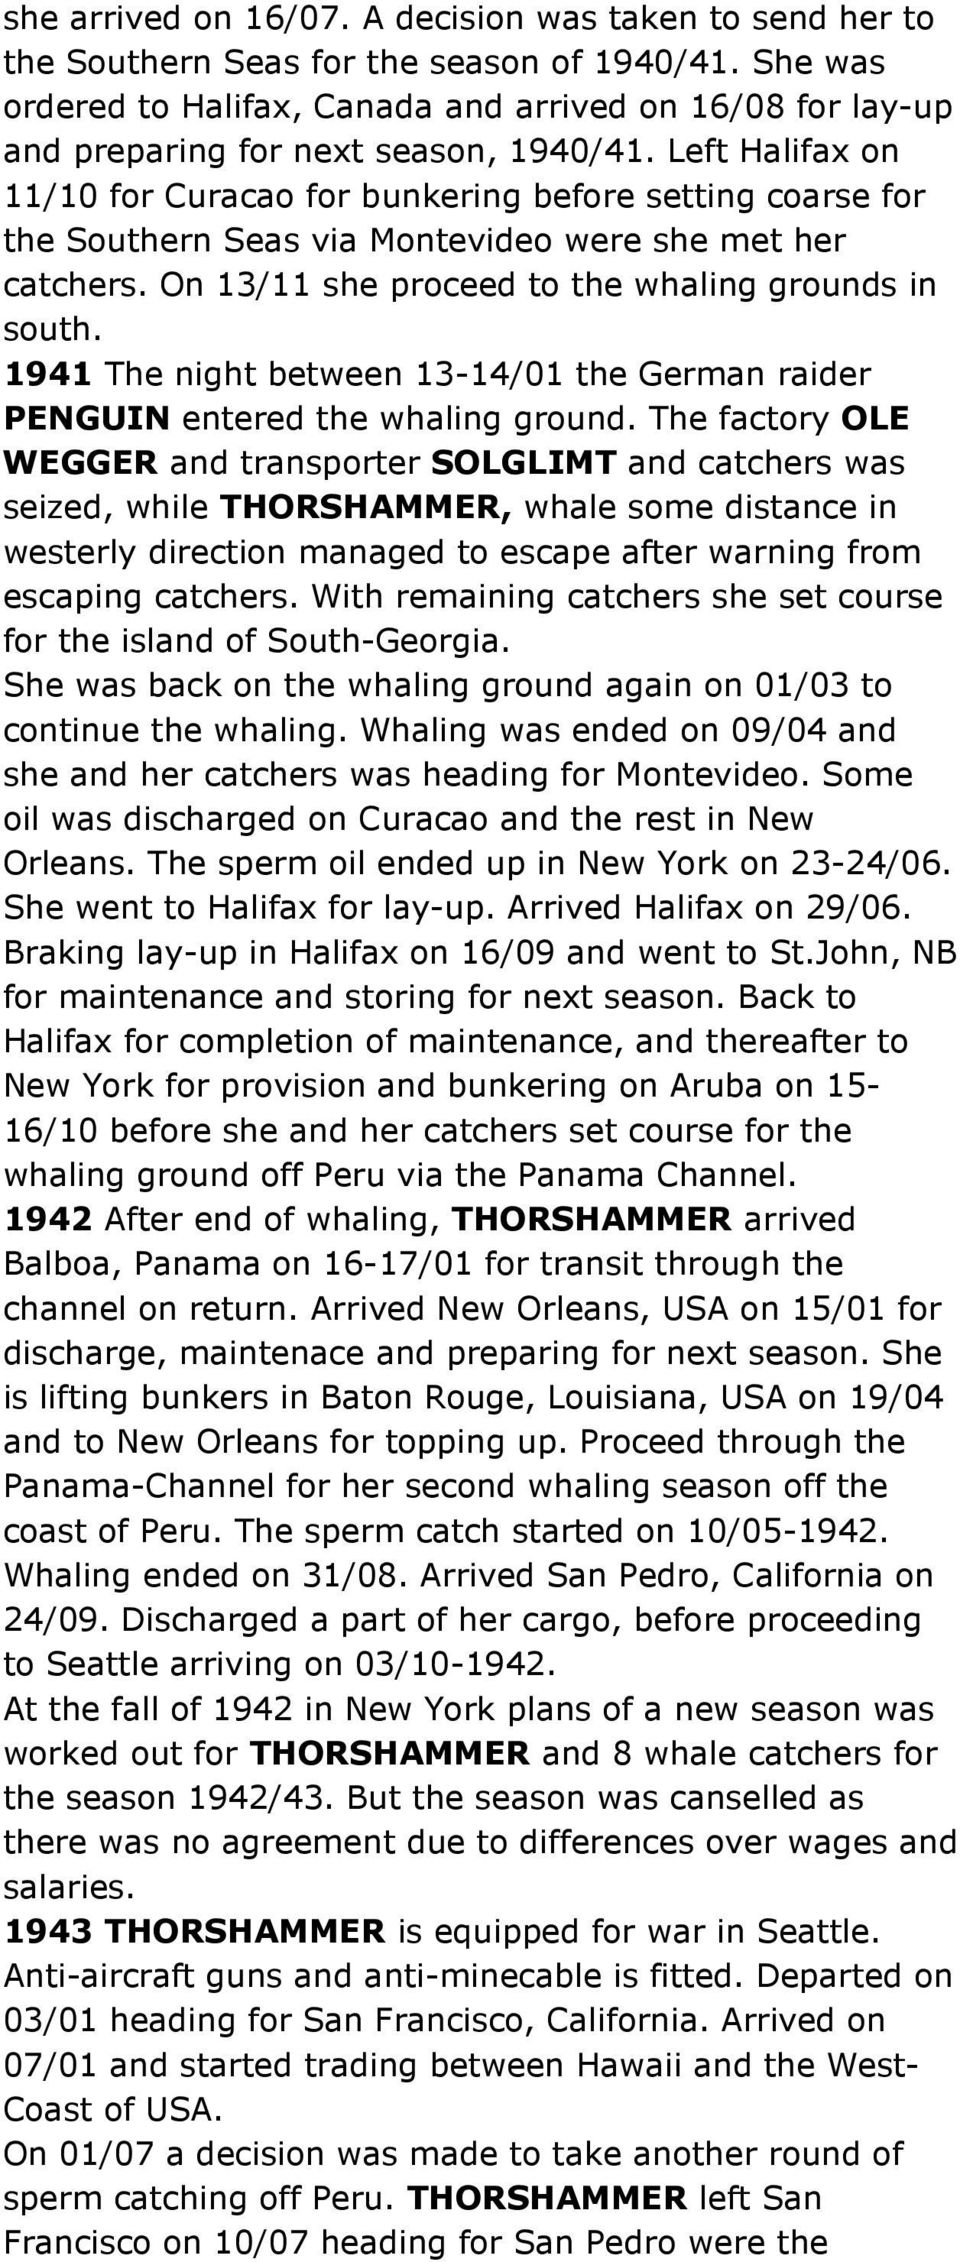 Left Halifax on 11/10 for Curacao for bunkering before setting coarse for the Southern Seas via Montevideo were she met her catchers. On 13/11 she proceed to the whaling grounds in south.